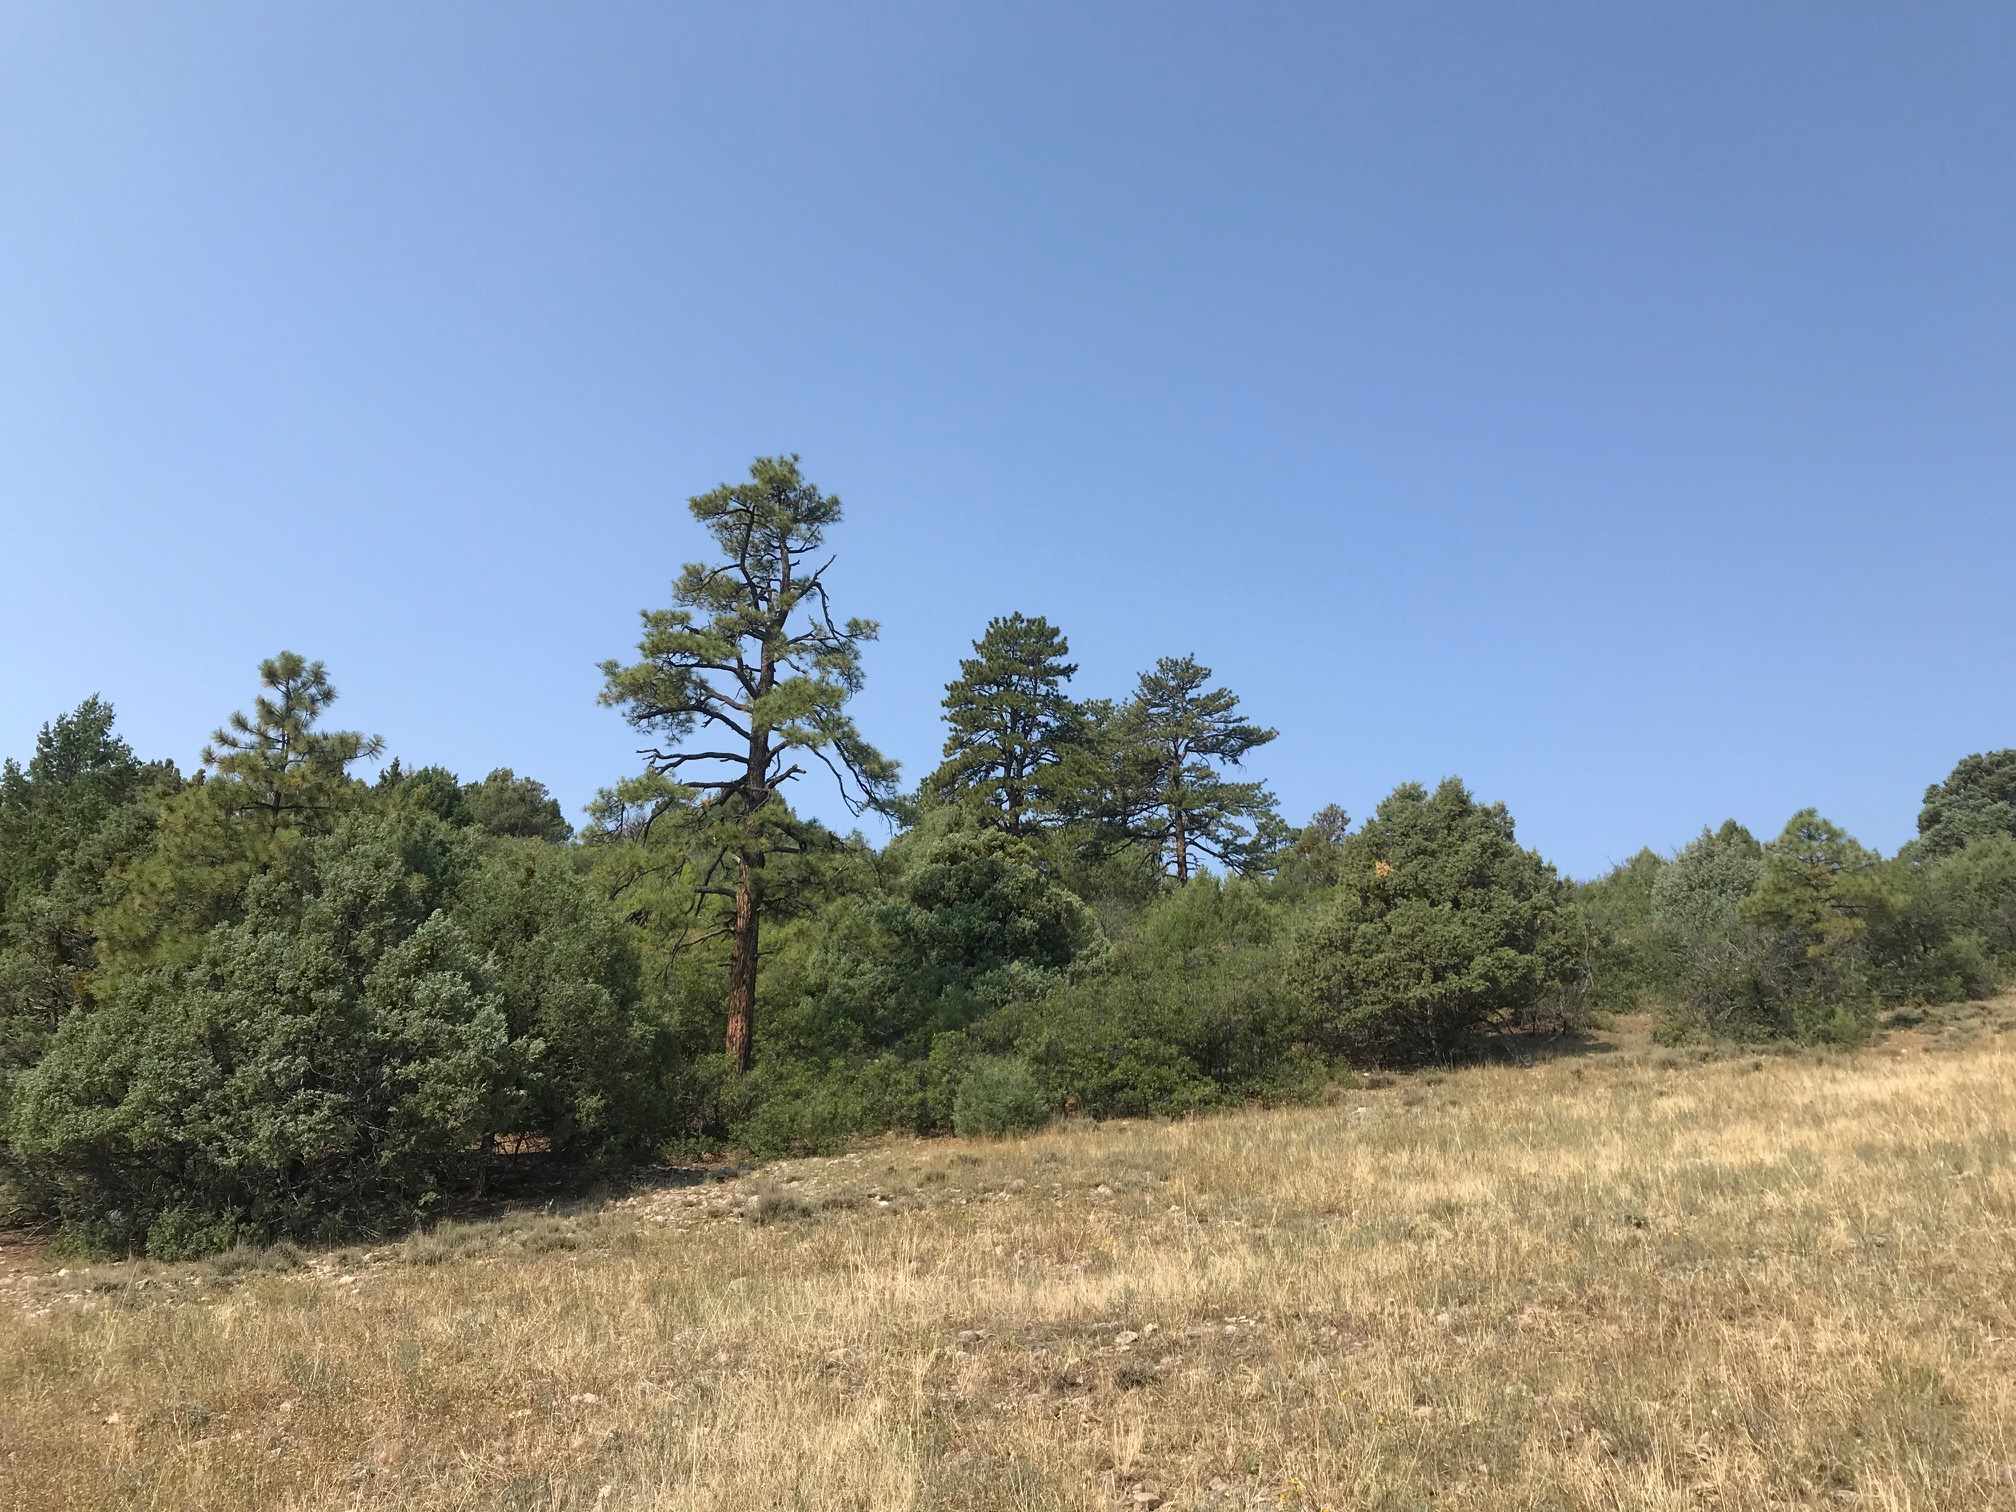 1 10A, Chama, New Mexico 87520, ,Land,For Sale,1 10A,202003511